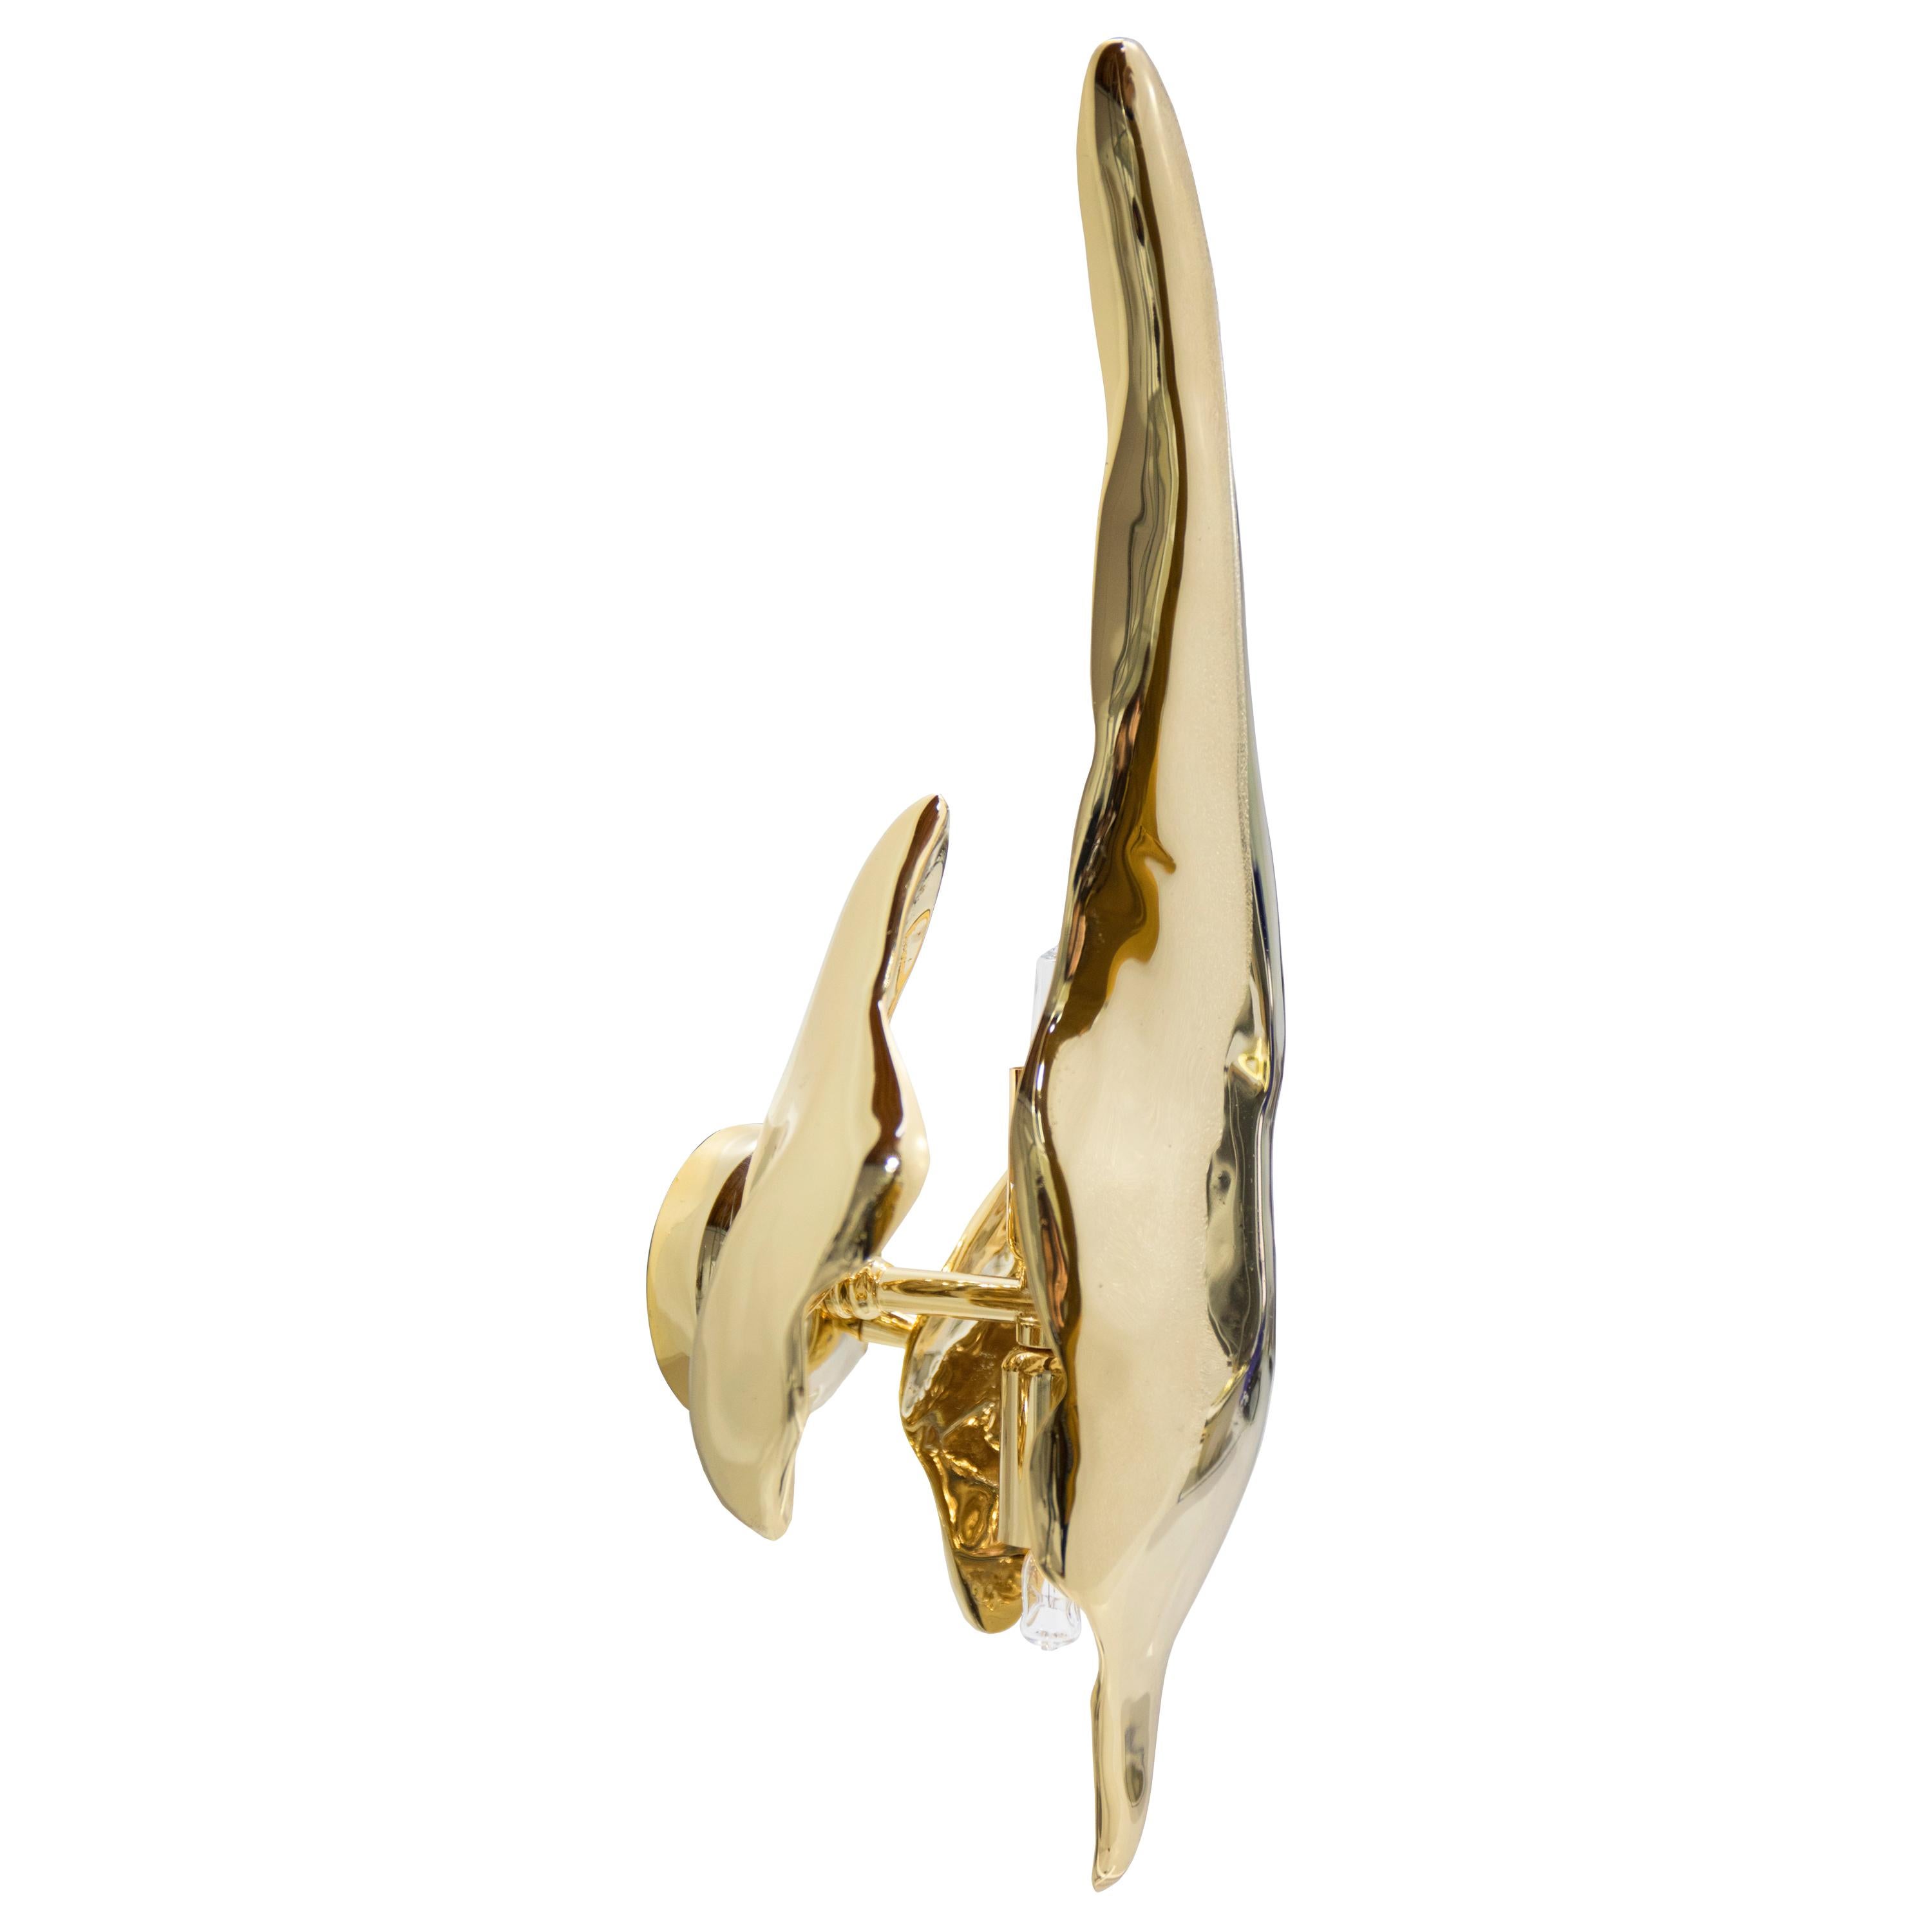 Modern Soleil Sconce in Casted Brass by Boca do Lobo For Sale